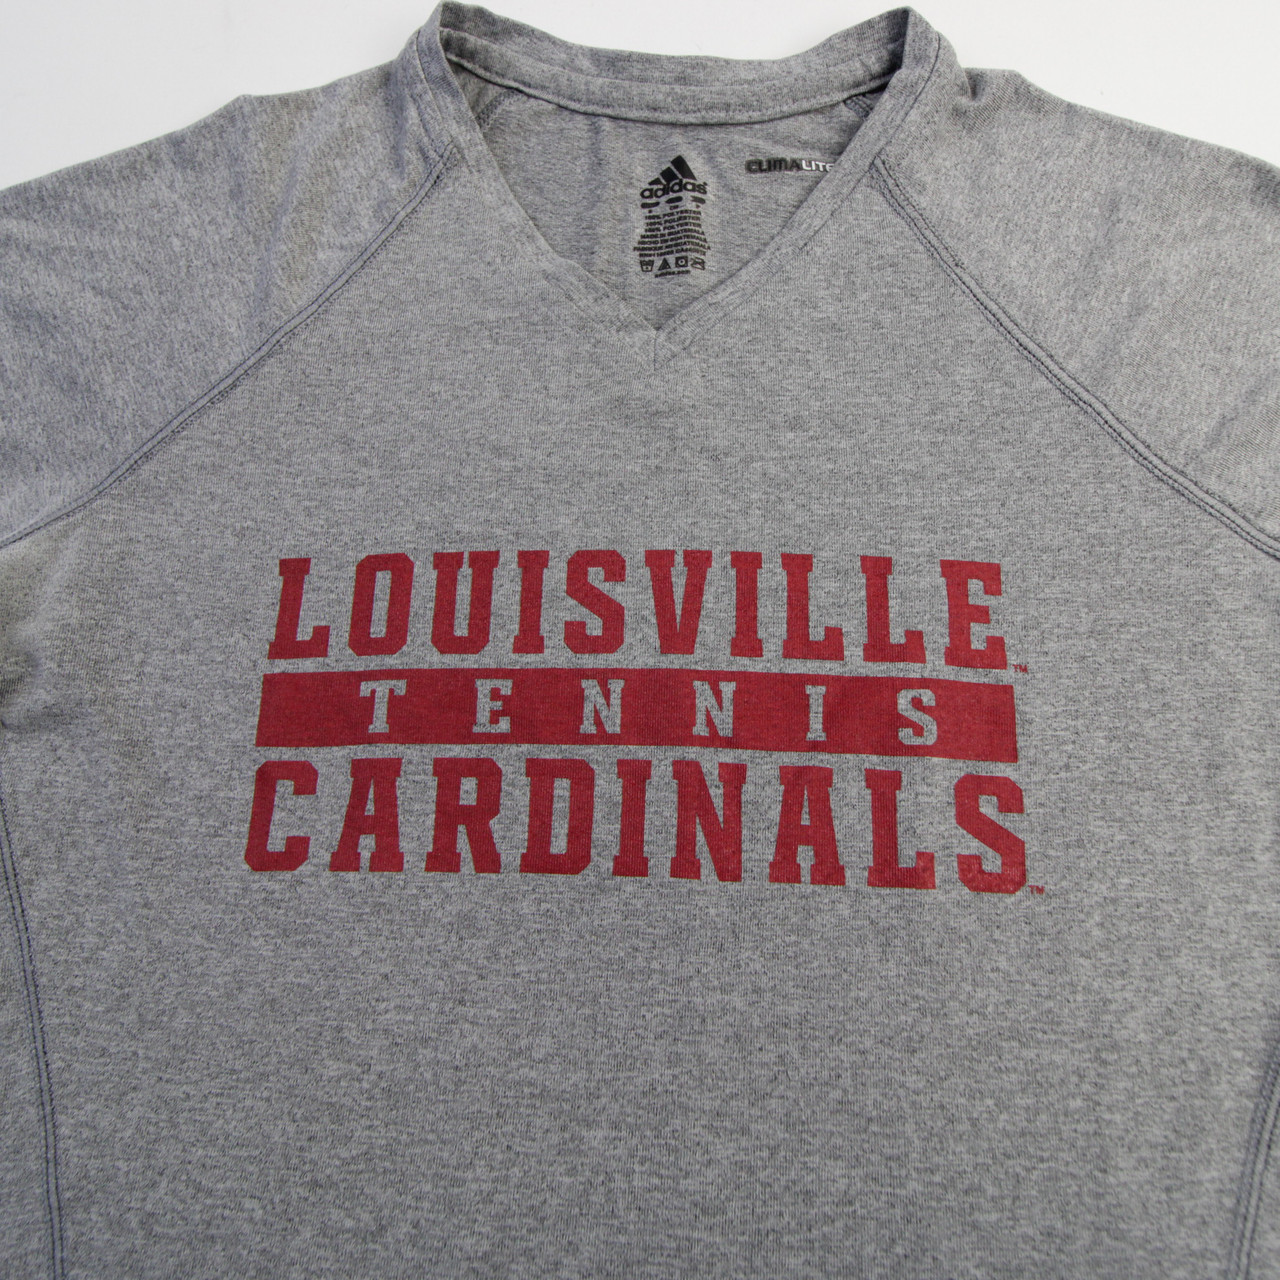 Adidas Louisville Cardinals Womens T Shirt S Small Red Climalite